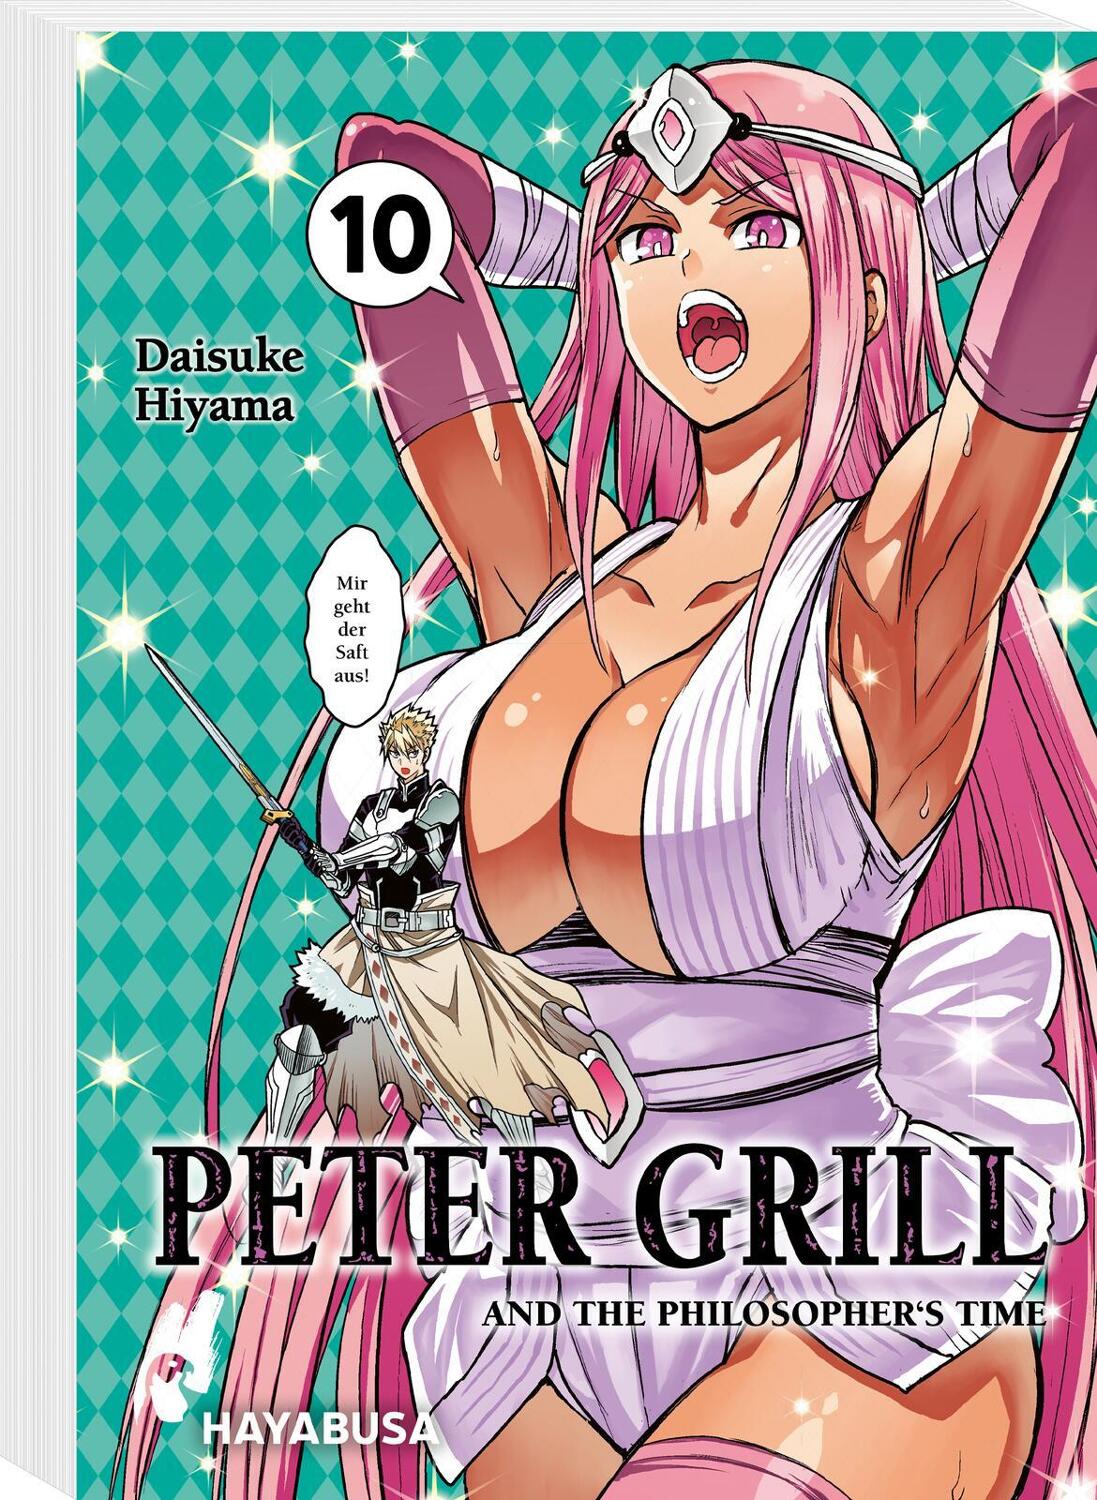 Peter Grill and the Philosopher's Time by Hiyama, Daisuke